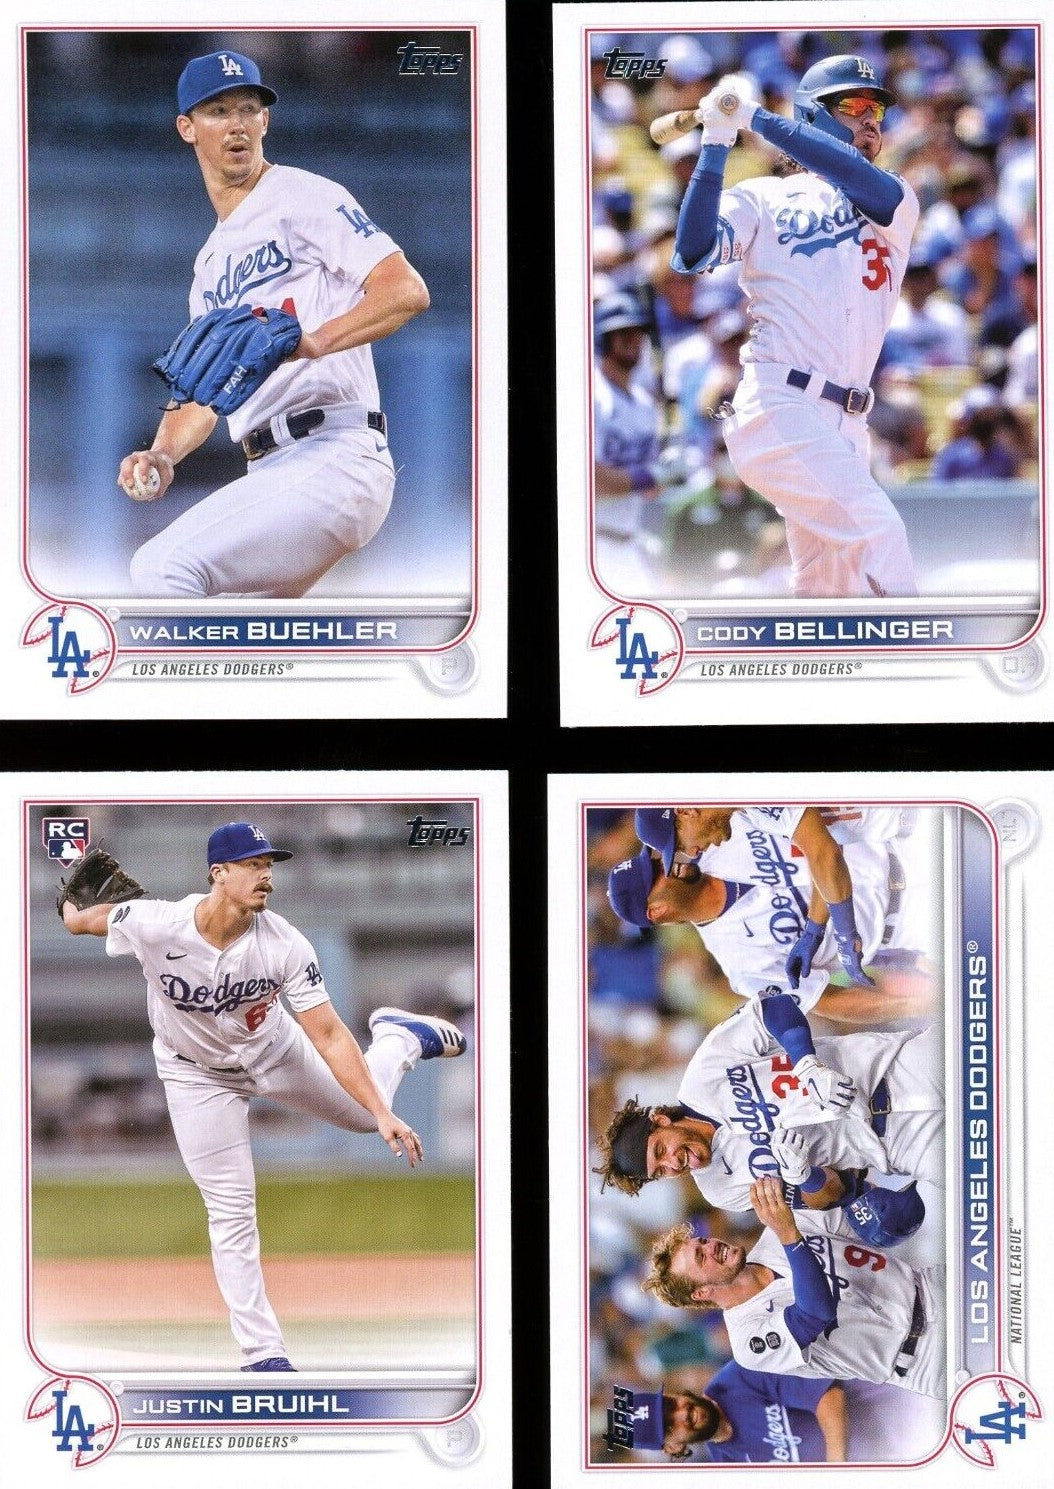 2022 Topps Opening Day #74 Trea Turner - Los Angeles Dodgers MLB